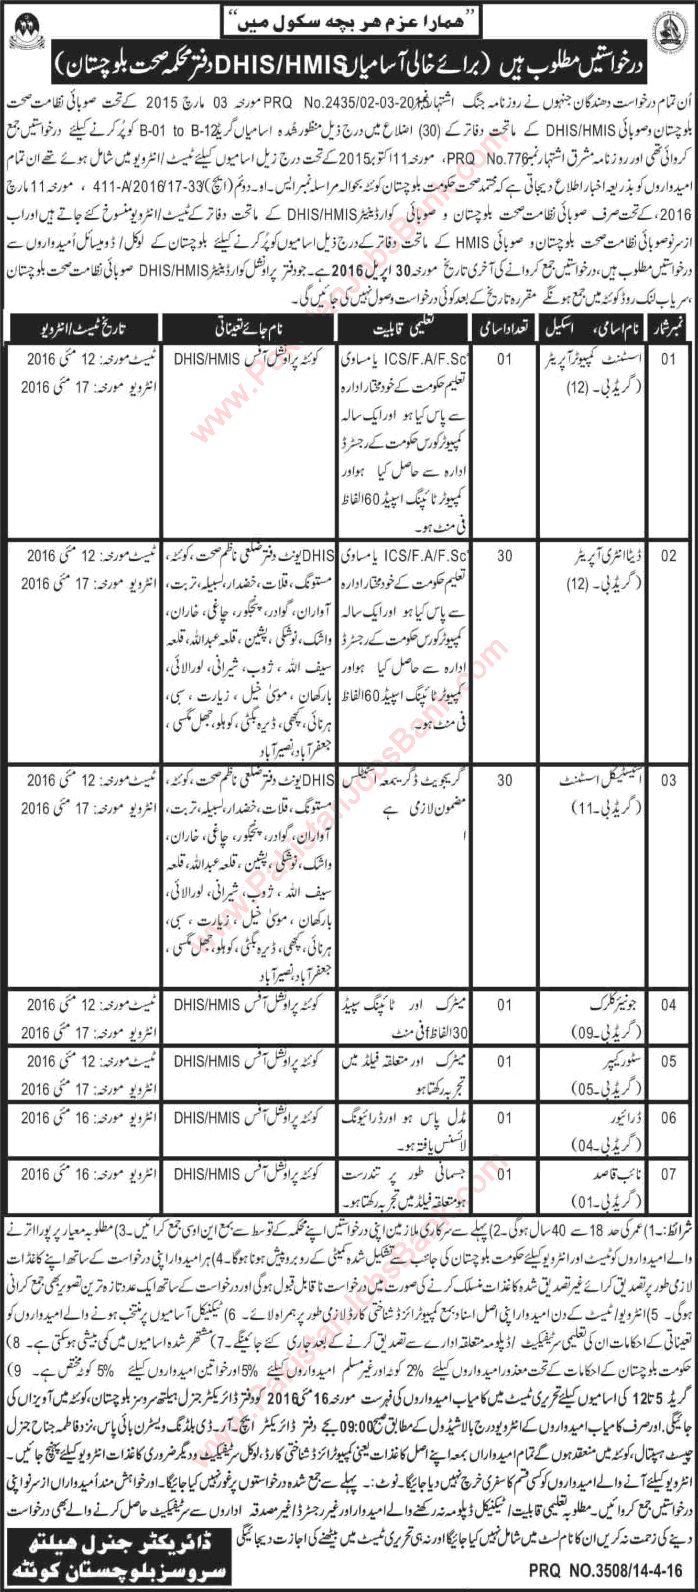 Health Department Balochistan Jobs April 2016 Data Entry Operators, Statistical Assistants & Others DHIS / HMIS Latest